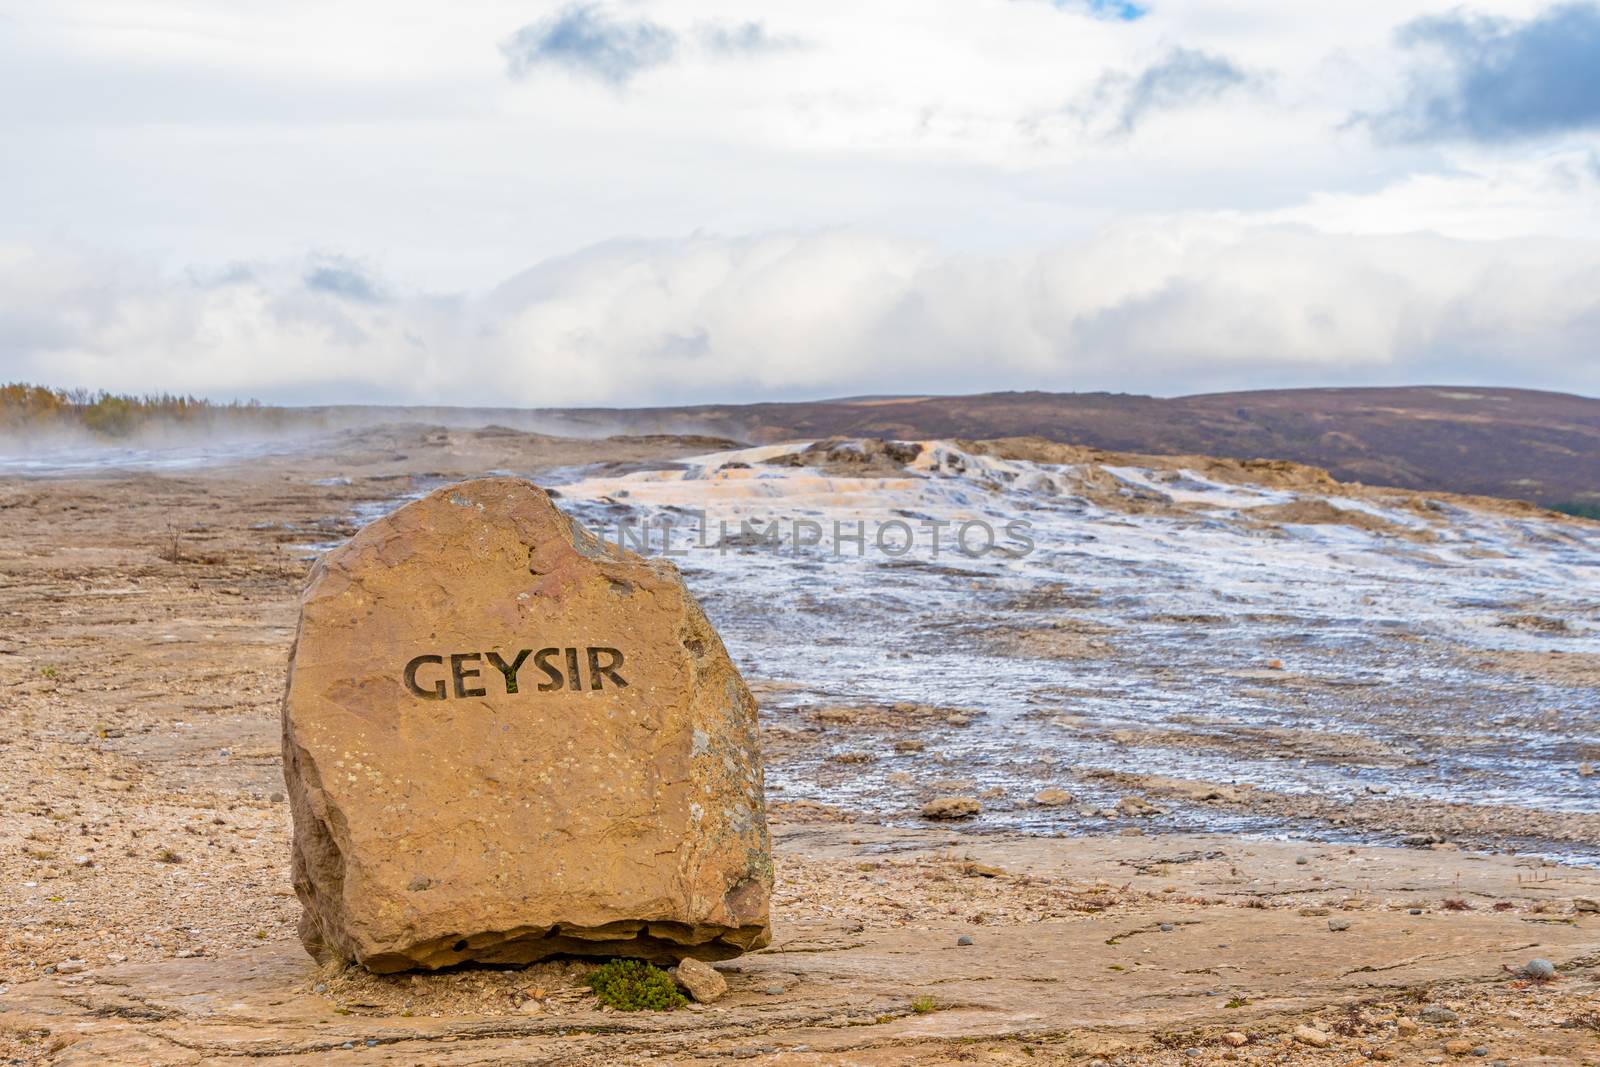 Geysir Golden Circle in Iceland name cut in rock in front of the geothermal area